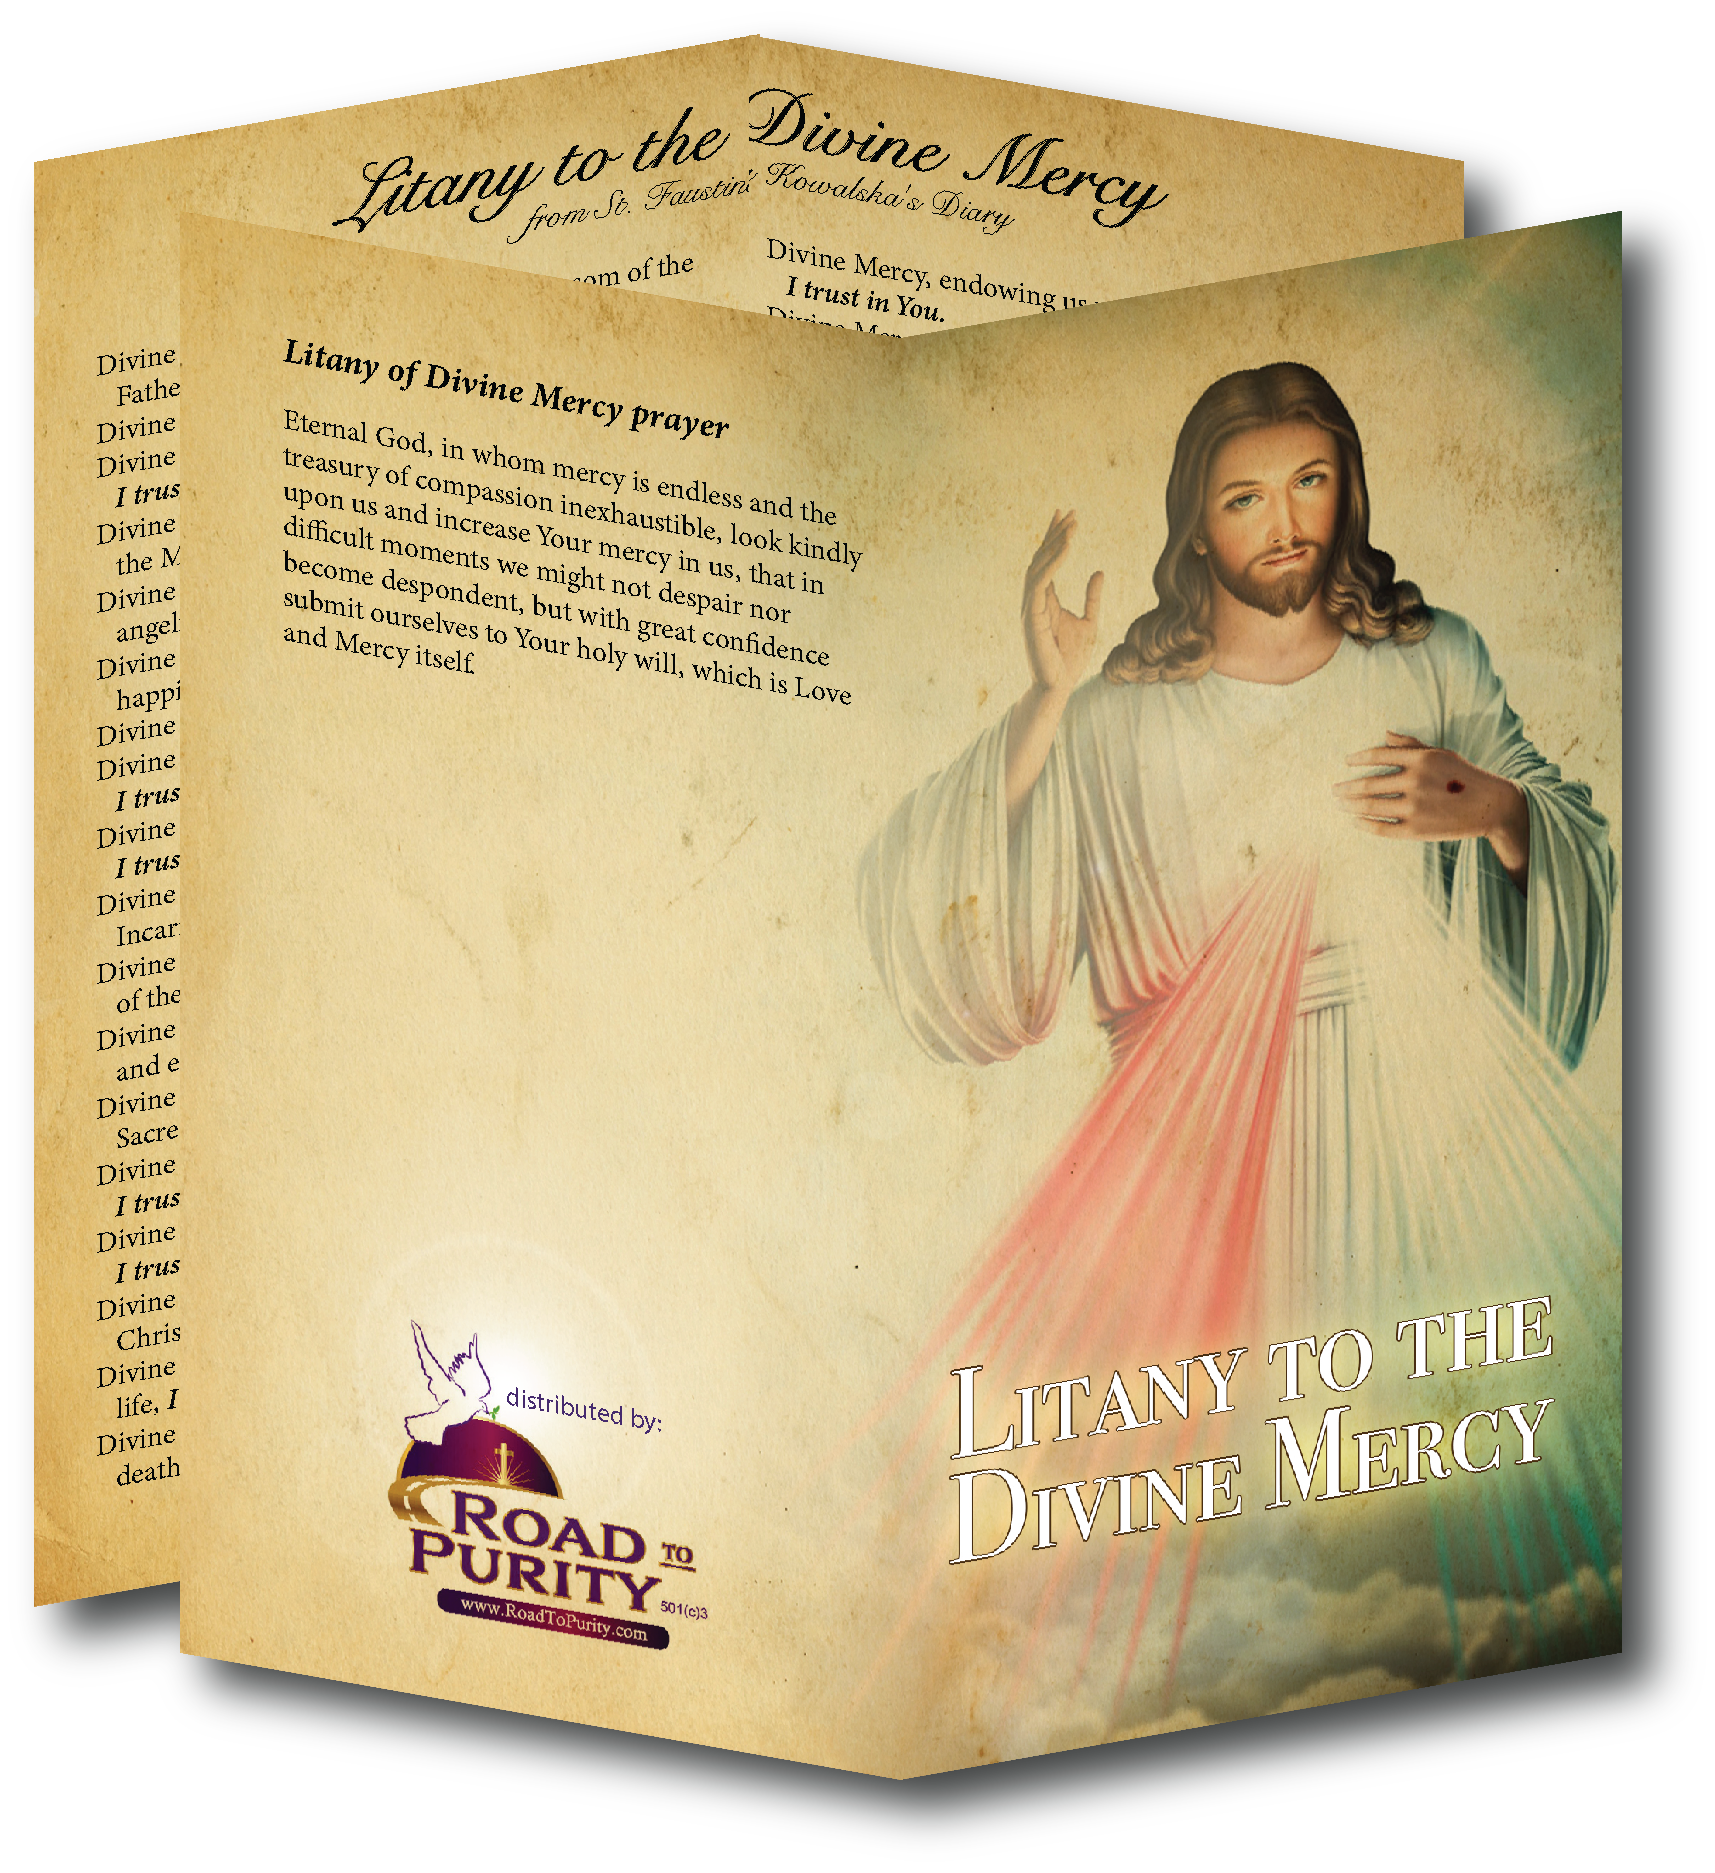 Litany to the Divine Mercy  - Prayer Card / 3" x 6" folded